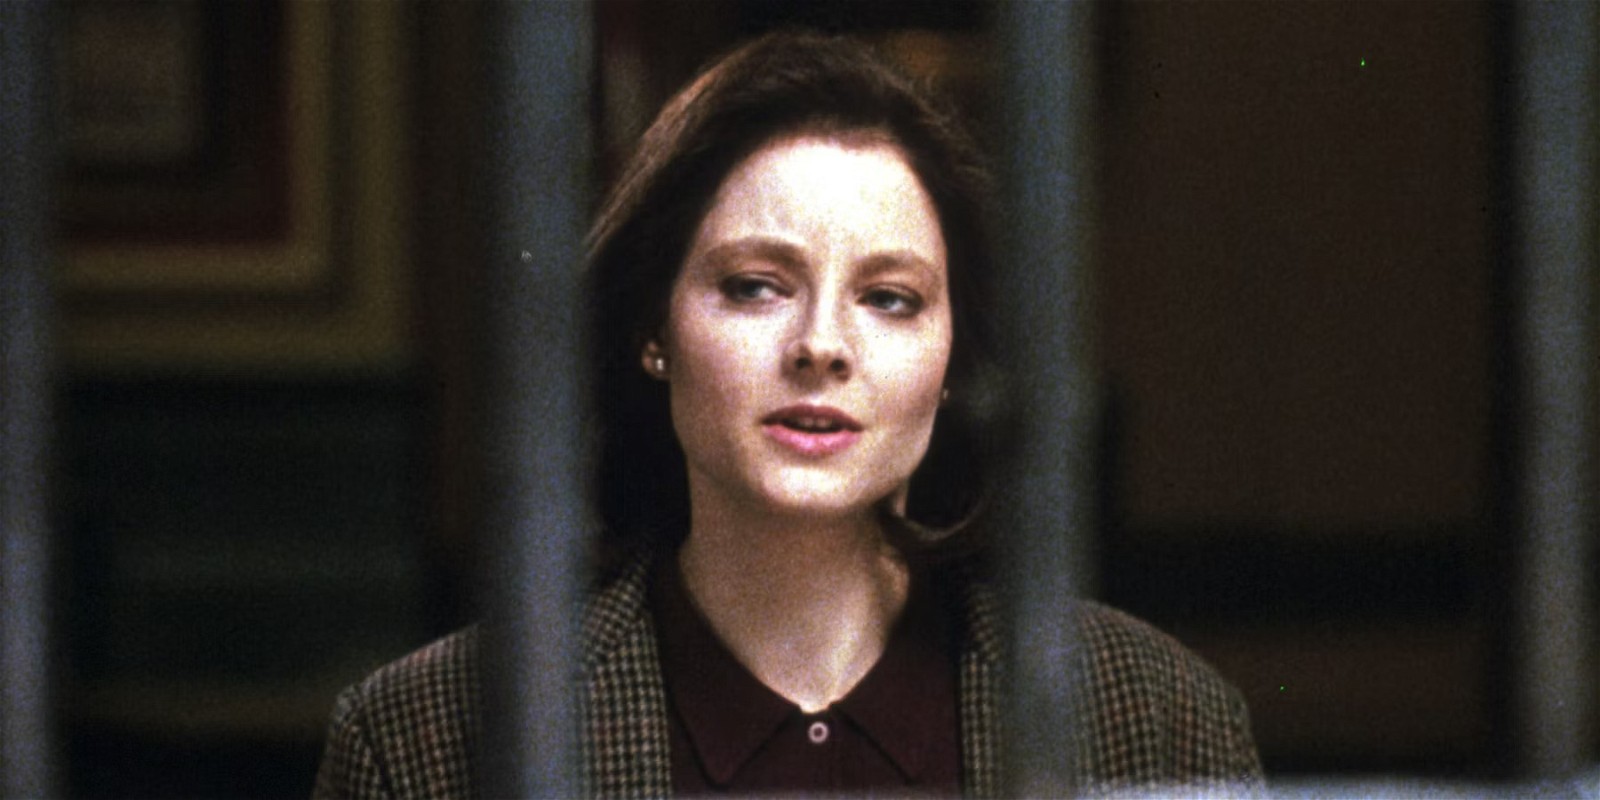 Jodie Foster in The Silence of the Lambs